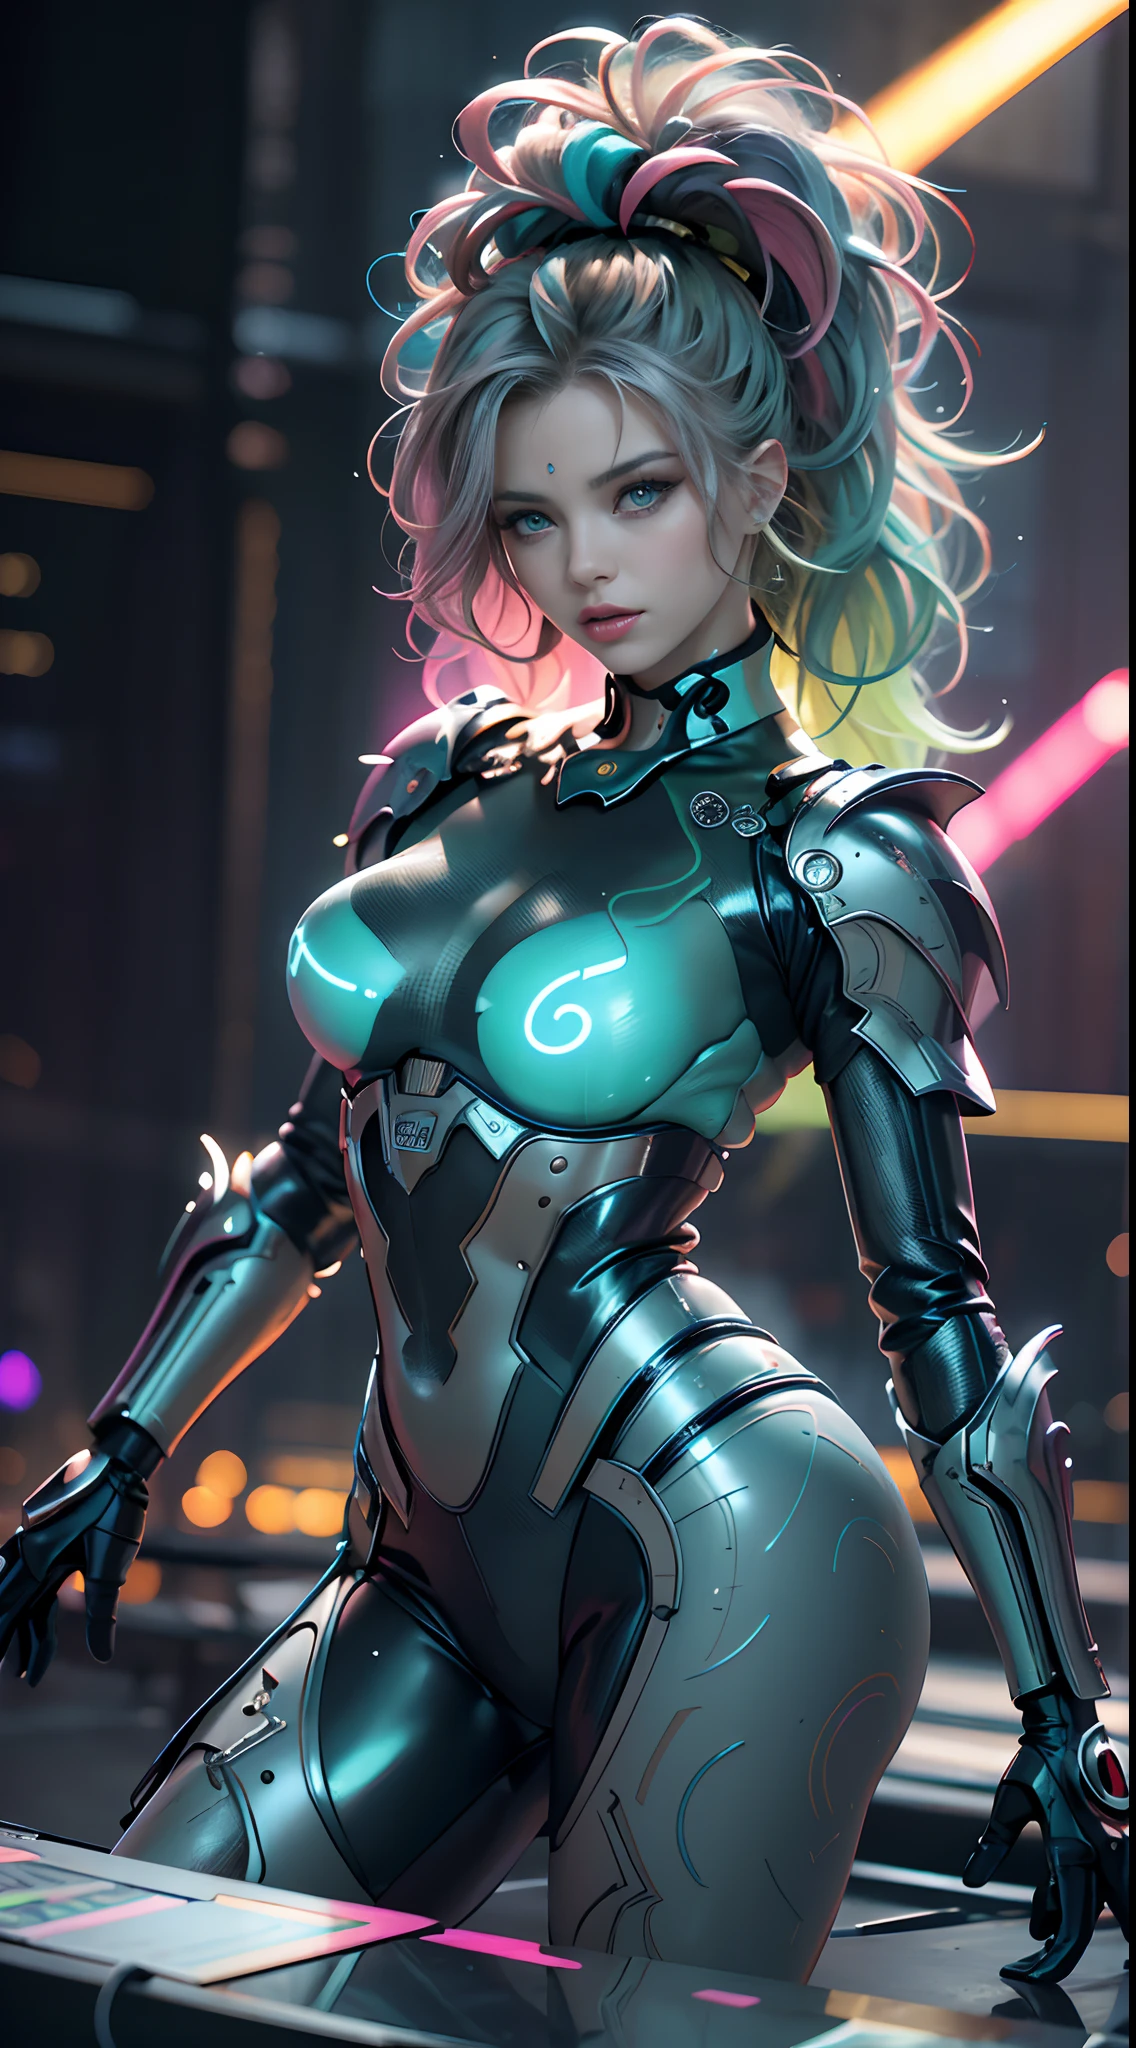 unreal engine:1.4,UHD,La Best Quality:1.4, photorealistic:1.4, skin texture:1.4, Masterpiece:1.8,first work, Best Quality, 1girl, Ives Girl, mecha, beautiful  lighting, (neon light: 1.2), (evening: 1.5), "first work, Best Quality, 1chica, Full length portrait, pose sensual, blue eyes, multicolored hair+yellow:1.3+green:1.3, Sculpted legs and tempting curves, full breasts, Beautiful face, many drops of water, clouds, twilights, Open floor plan, watercolor, neon light:1.2, evening:1.5, mecha, beautiful  lighting, Bright neon light: 1.2, unforgettable mysterious night: 1.5",(detailed hand:1.4),